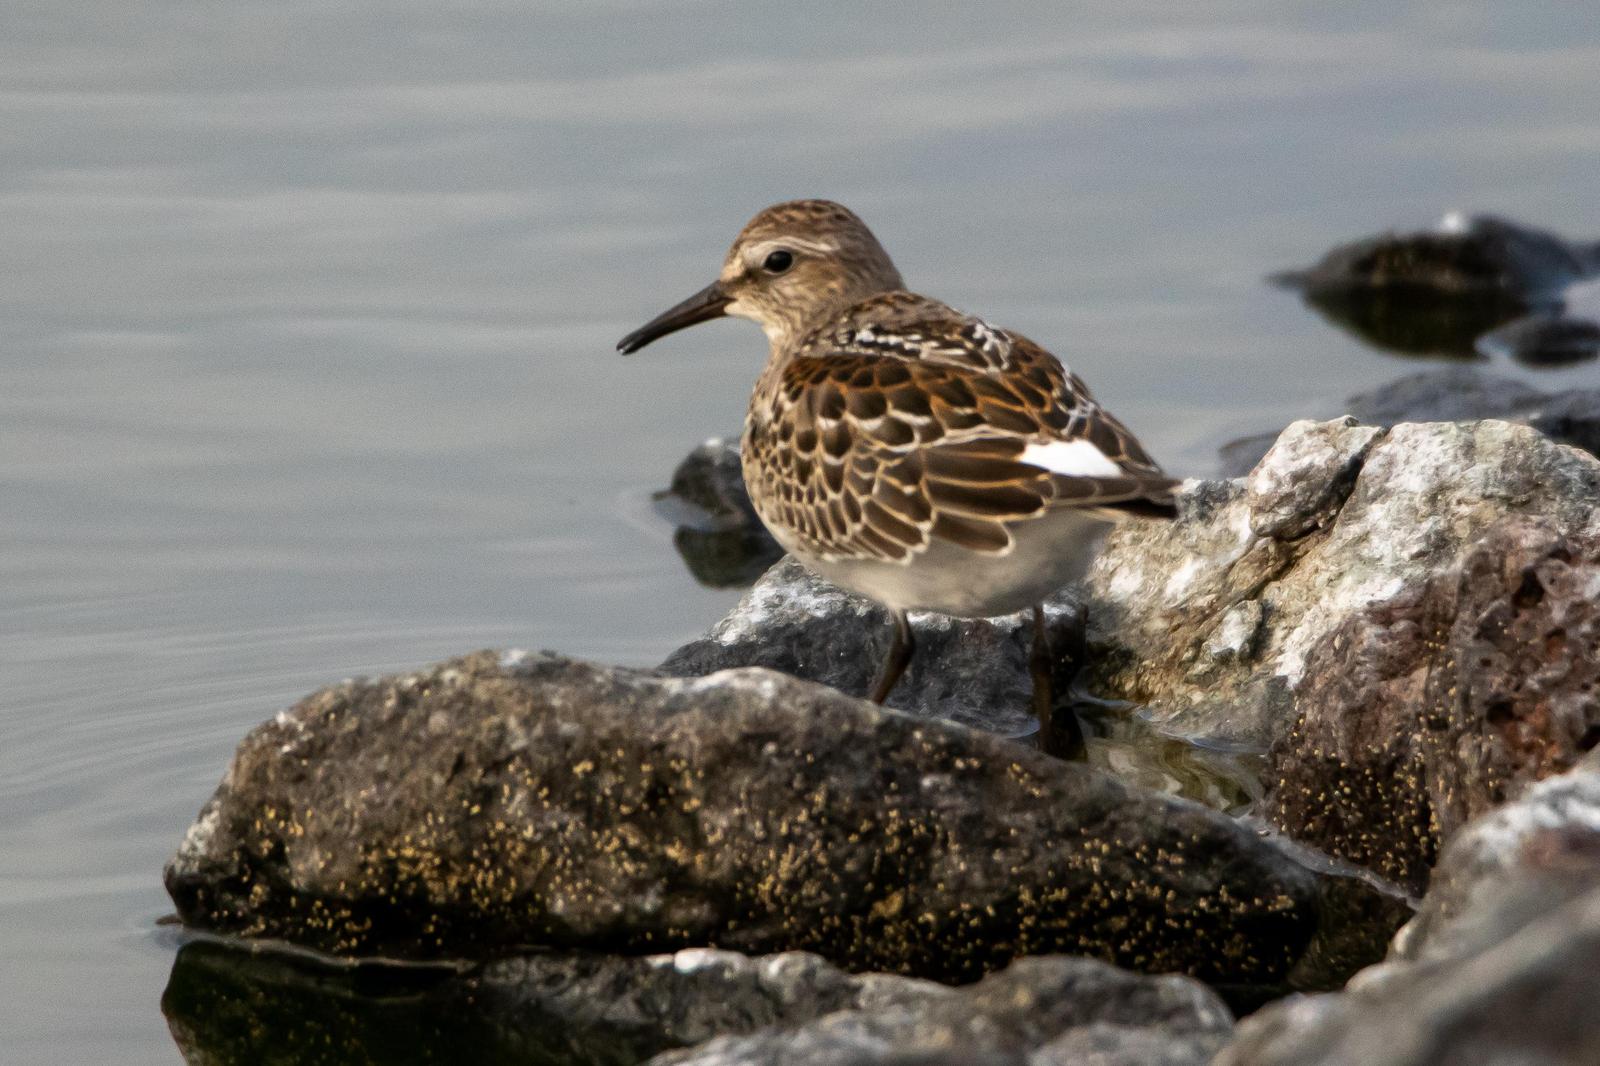 White-rumped Sandpiper Photo by Gerald Hoekstra